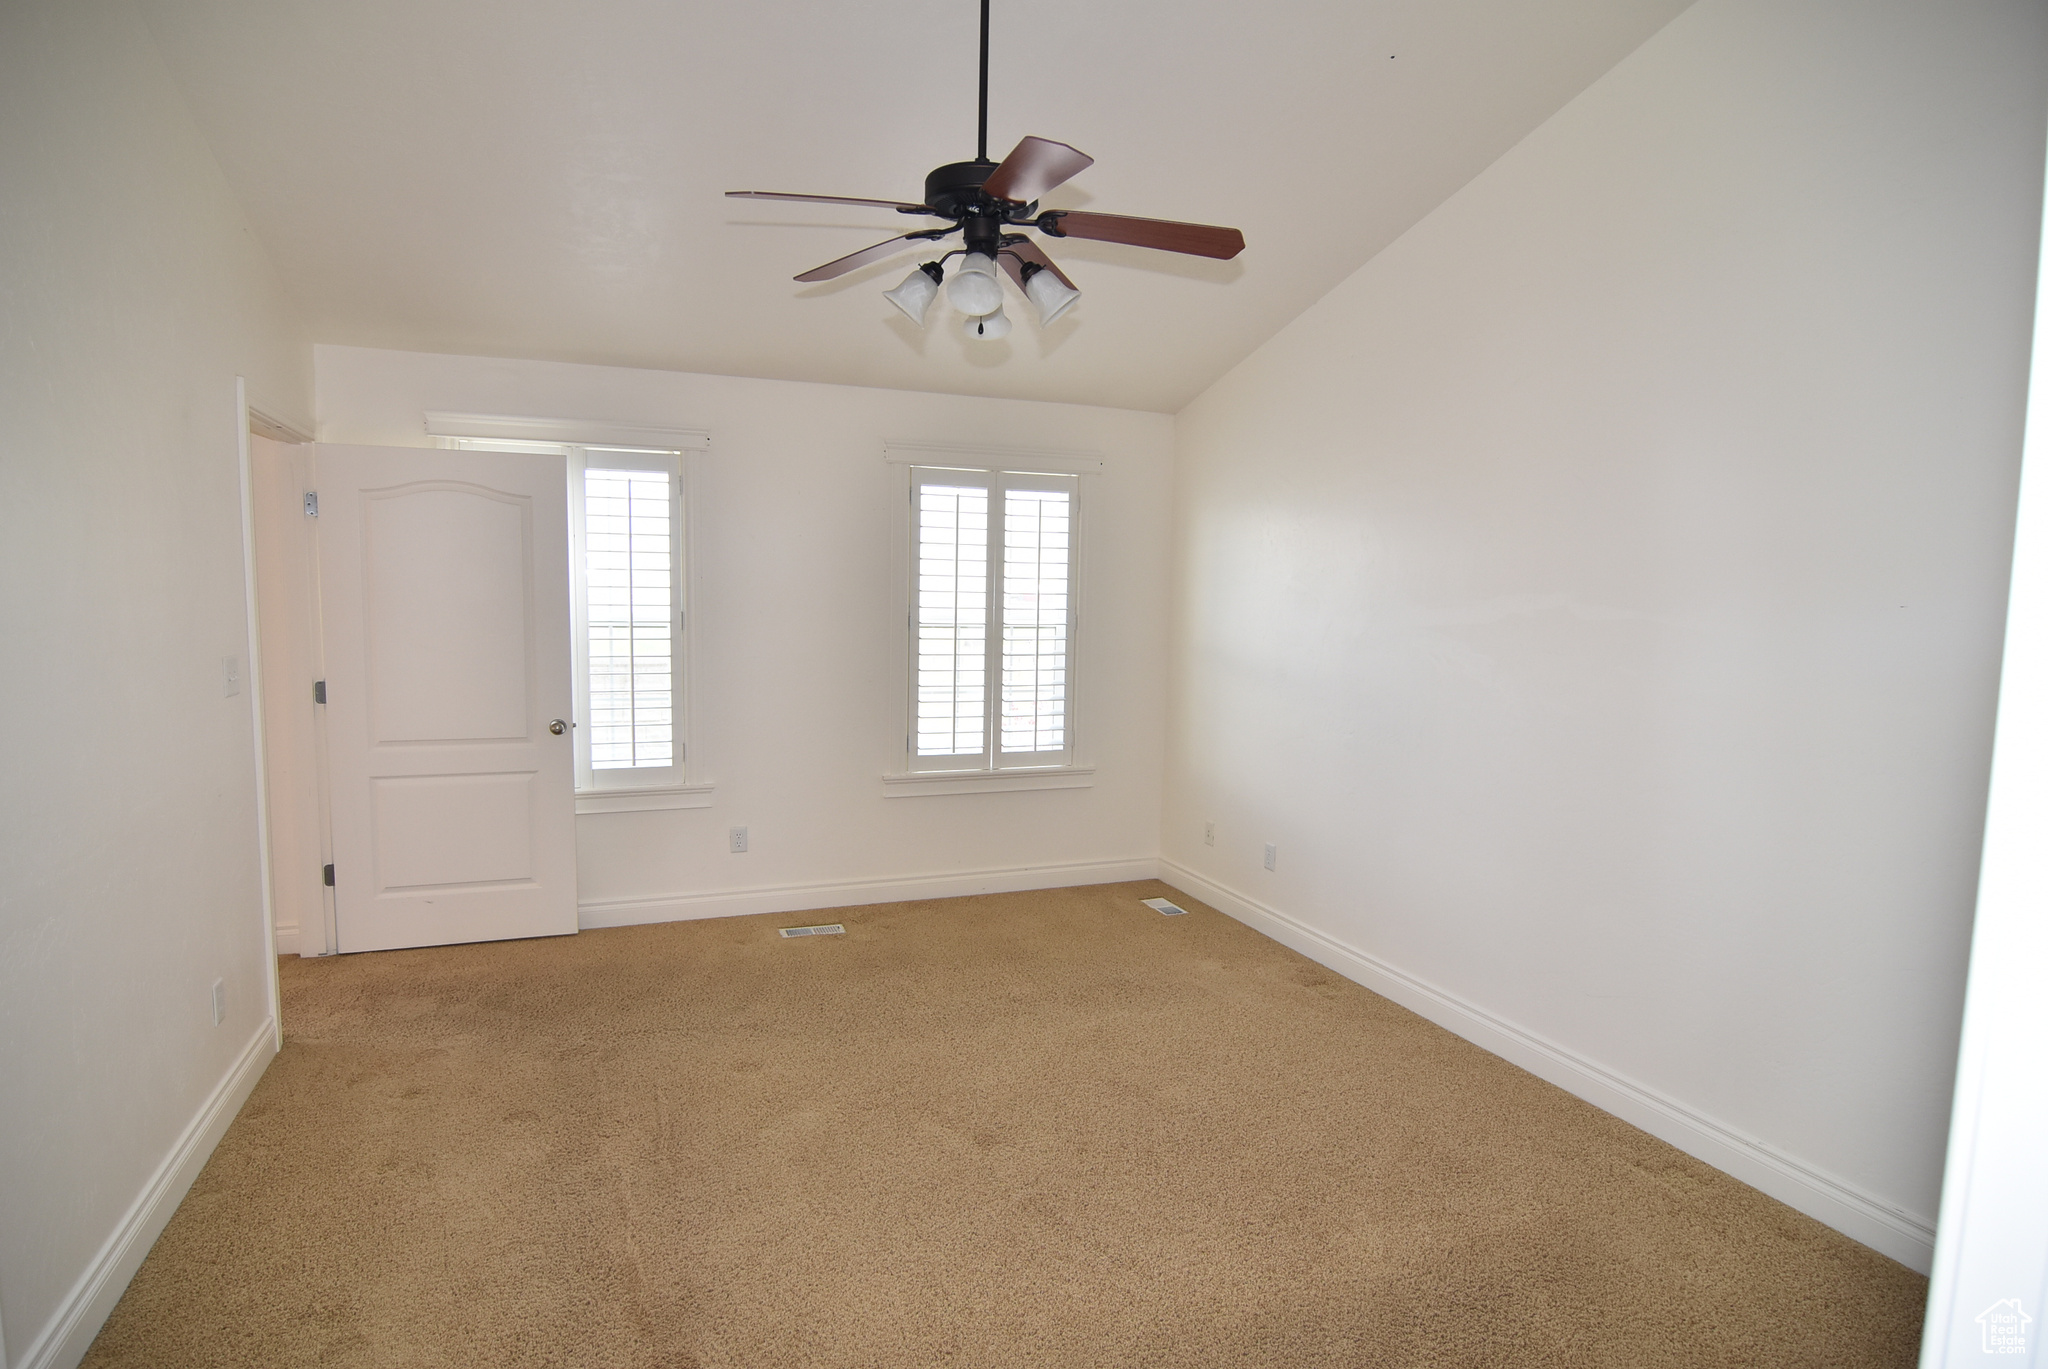 Master suite with ceiling fan, vaulted ceilings and plantation shutters